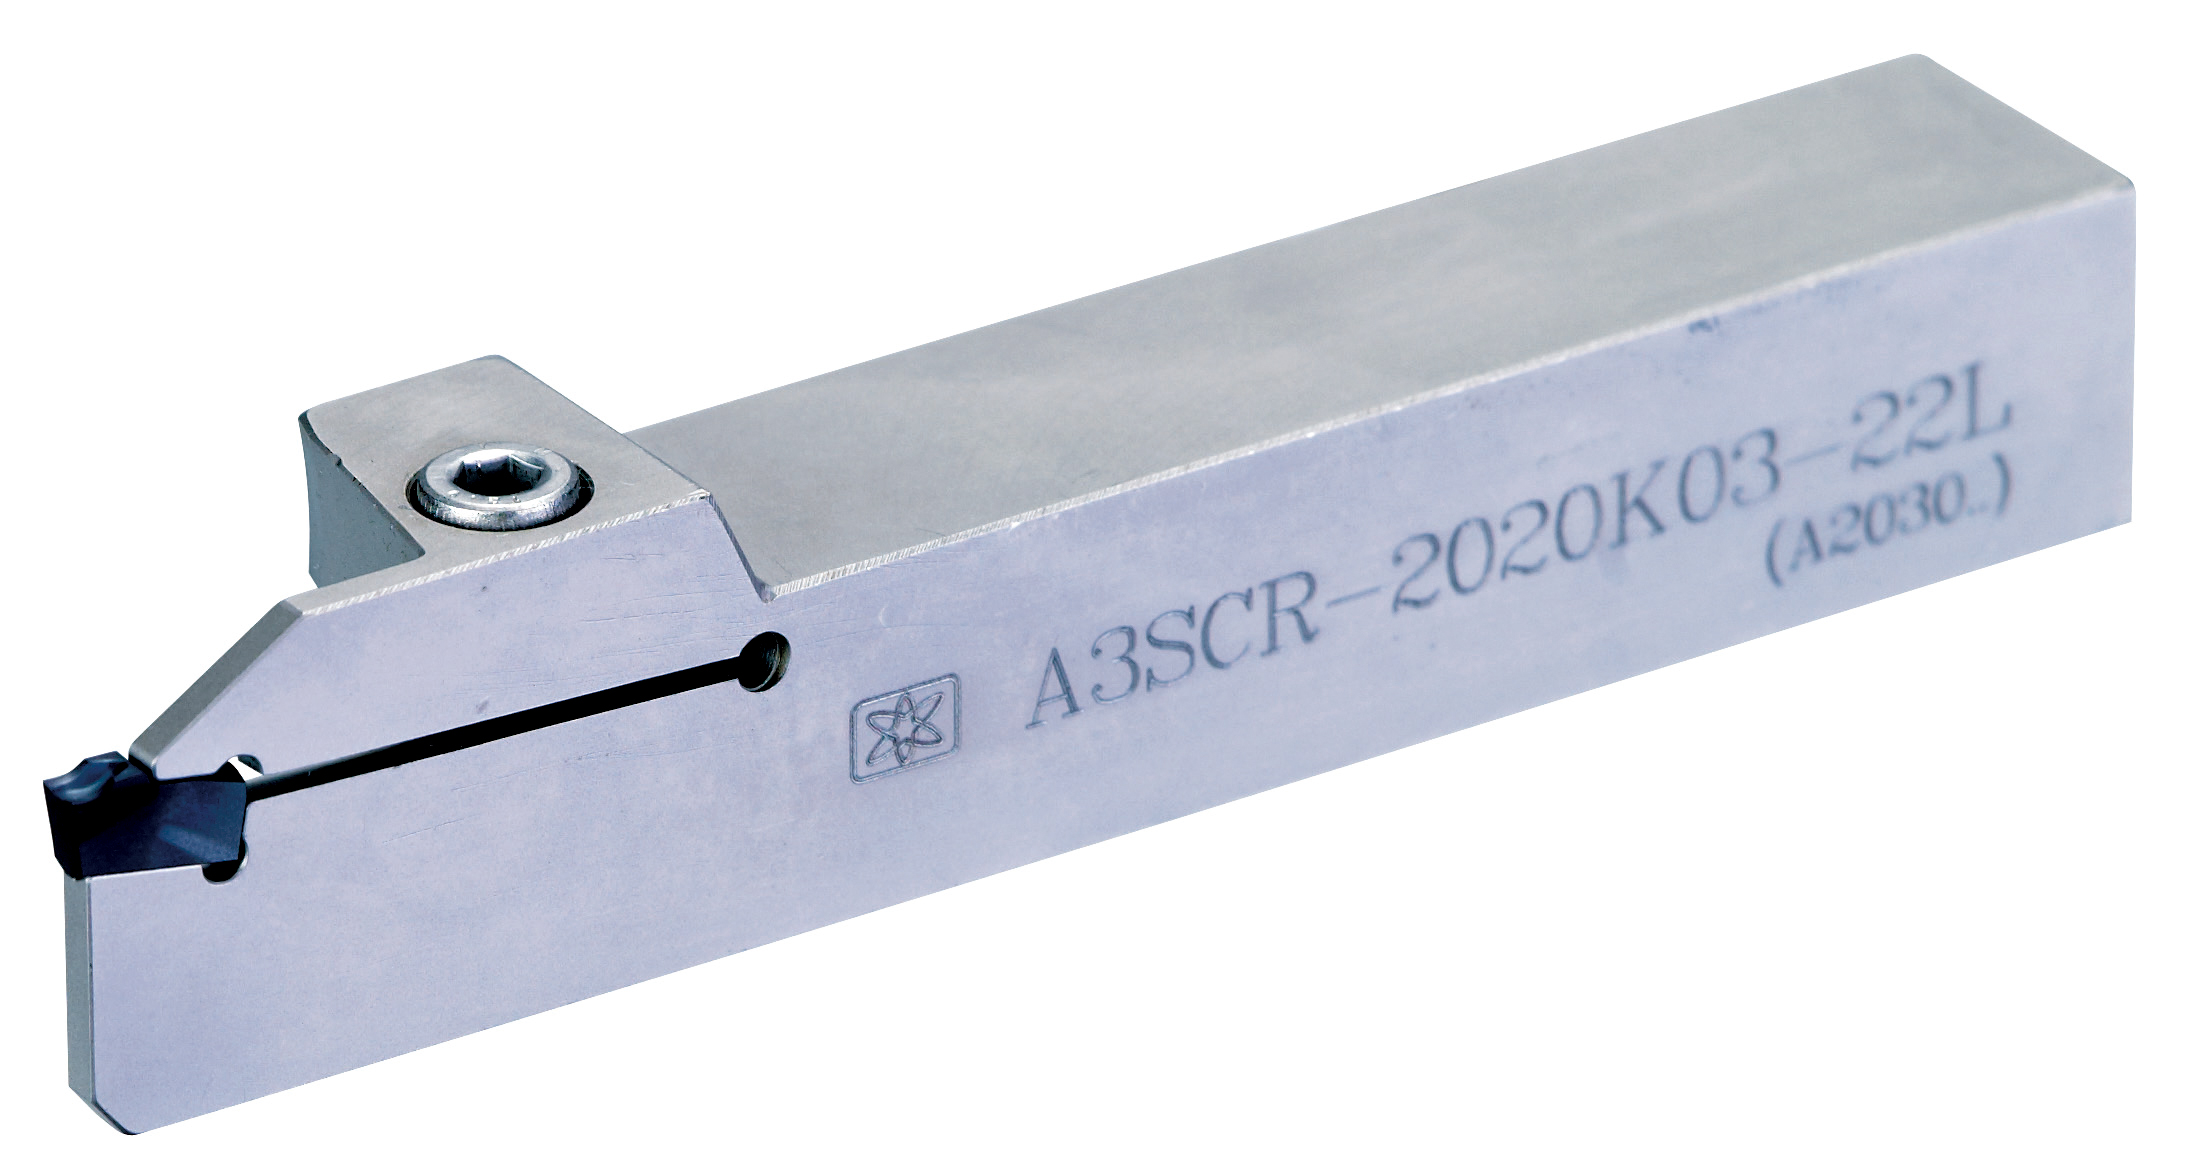 Products|A3SC (A2022 / A2030) External Grooving Toolholder